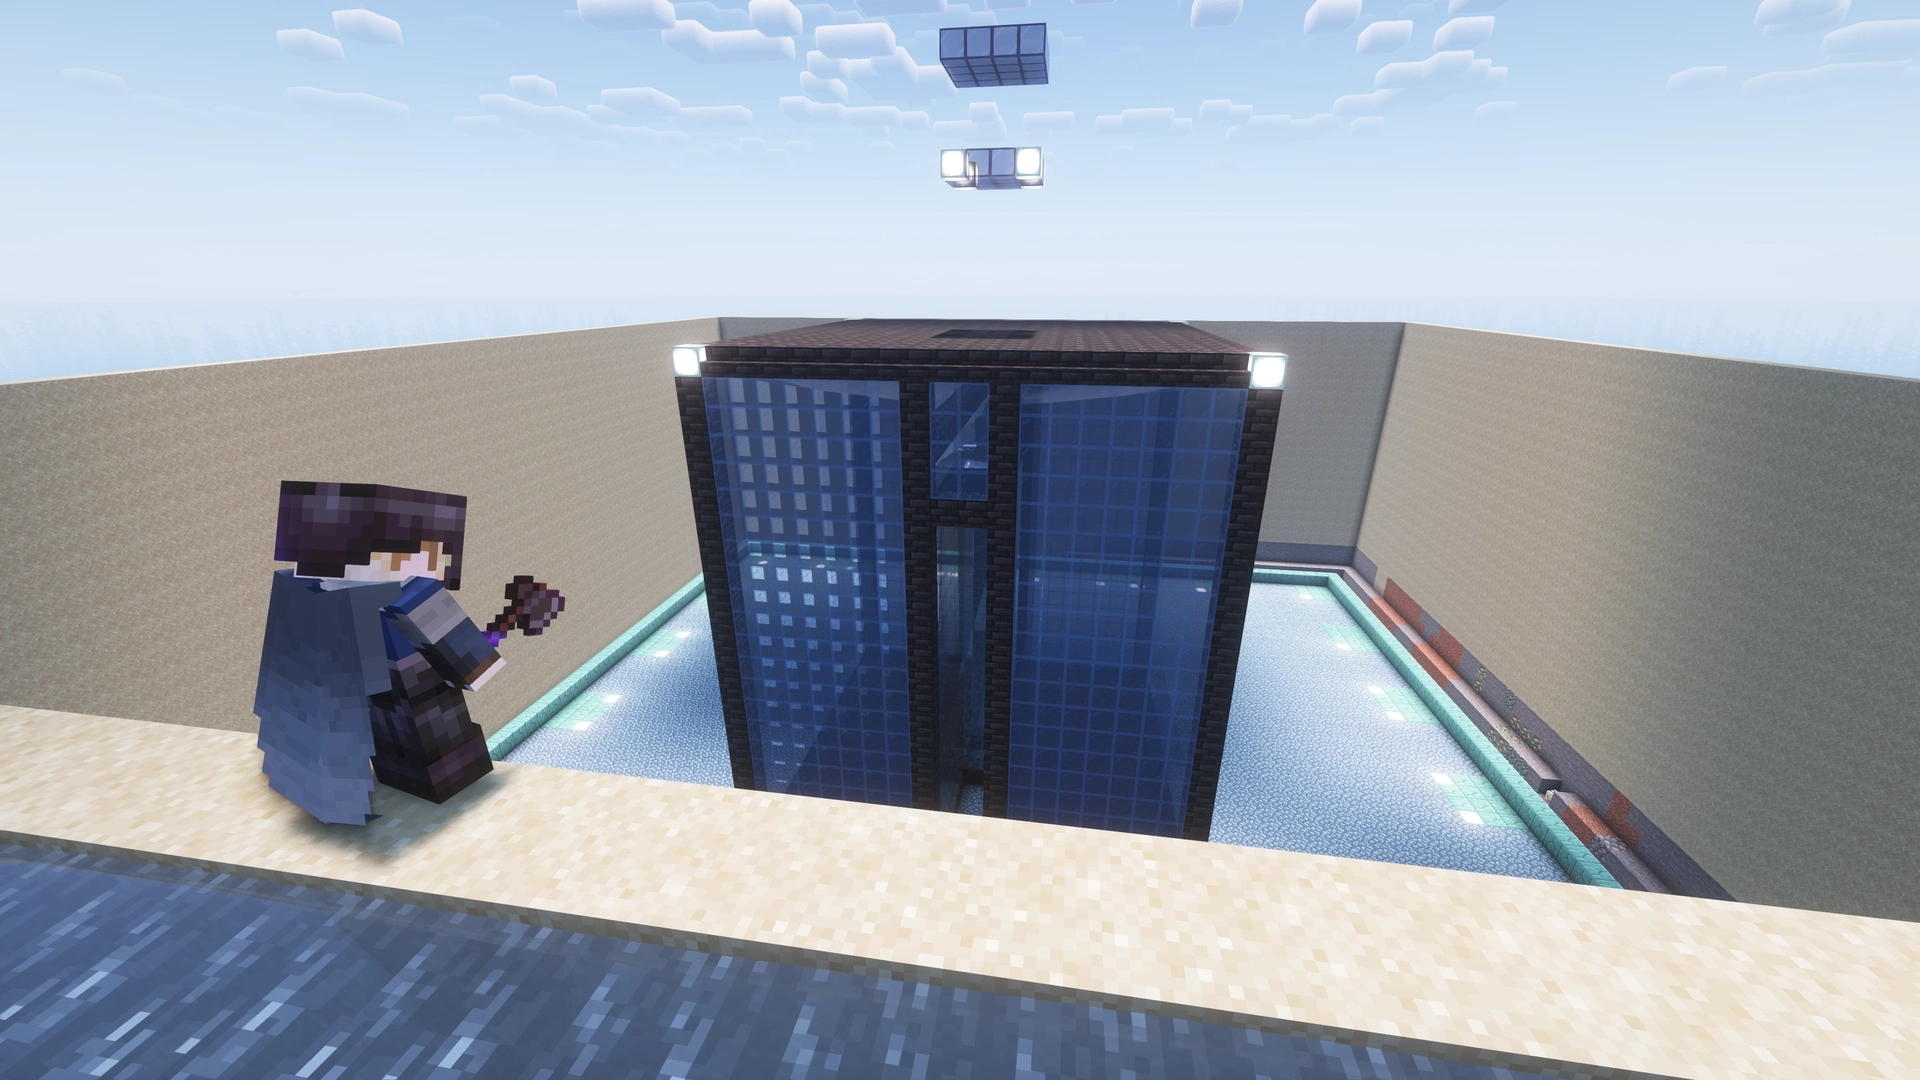 Me standing on top of one of the sand walls, looking inwards to the now completed Guardian farm. It's comprimised of two glass tanks full of water that funnel guardians into a central chamber where they fall and have their drops collected underground